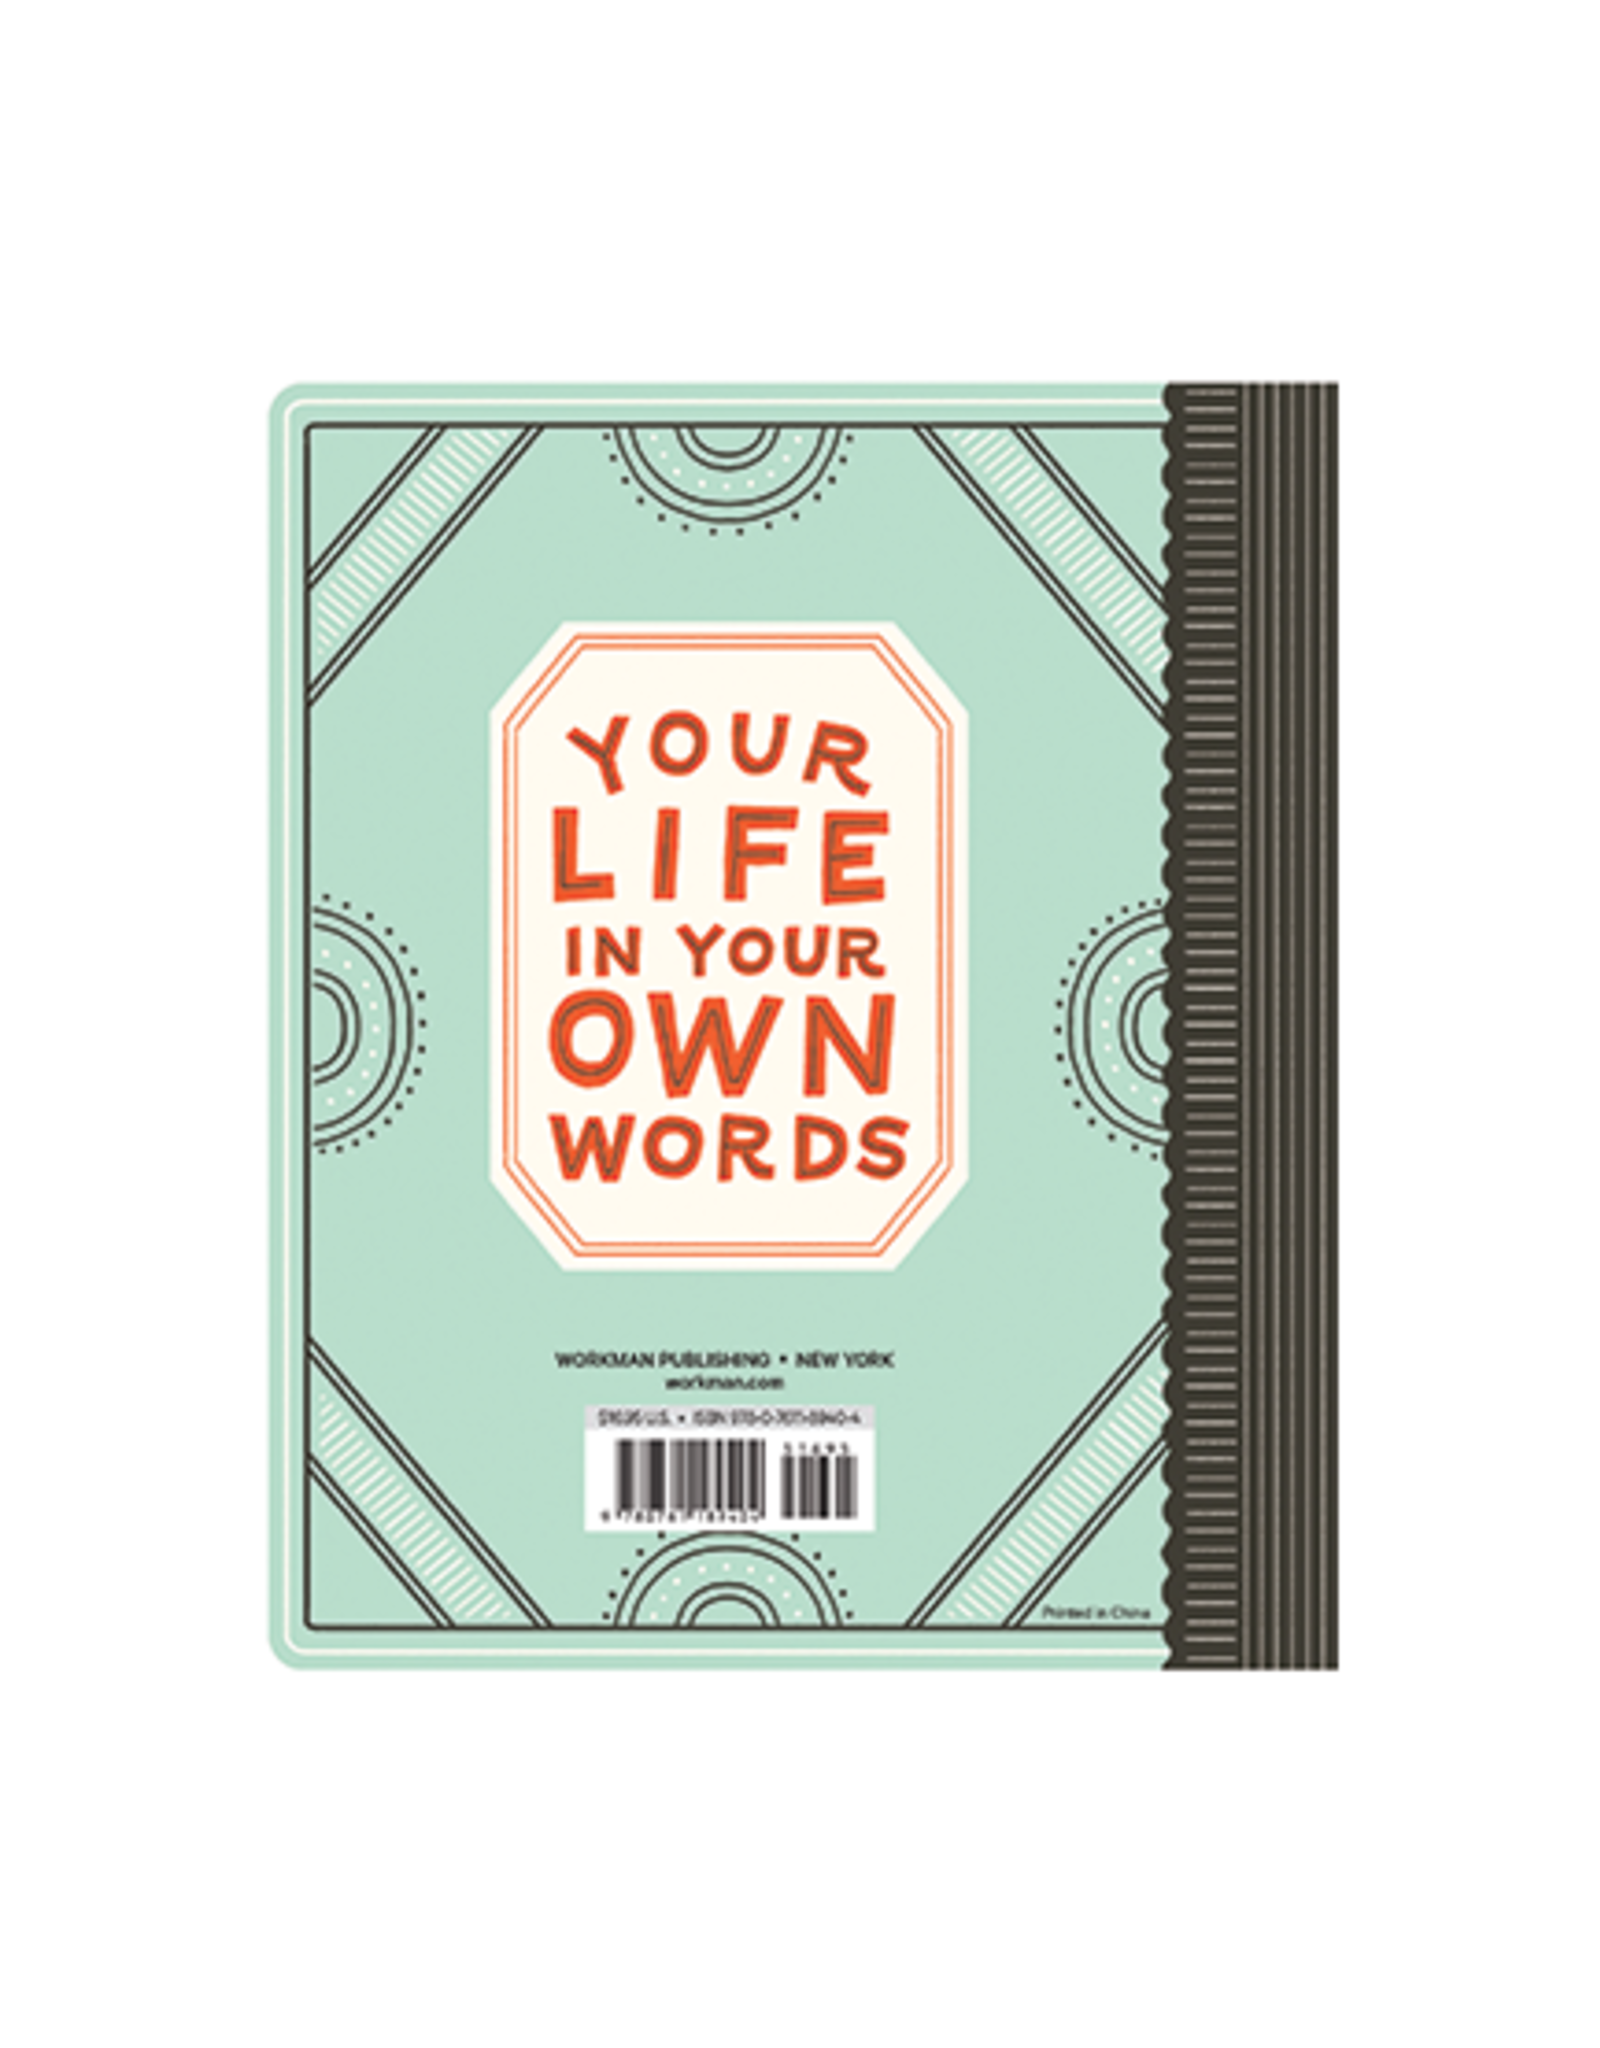 Workman Publishing Every Day is Epic:  Guided Journal